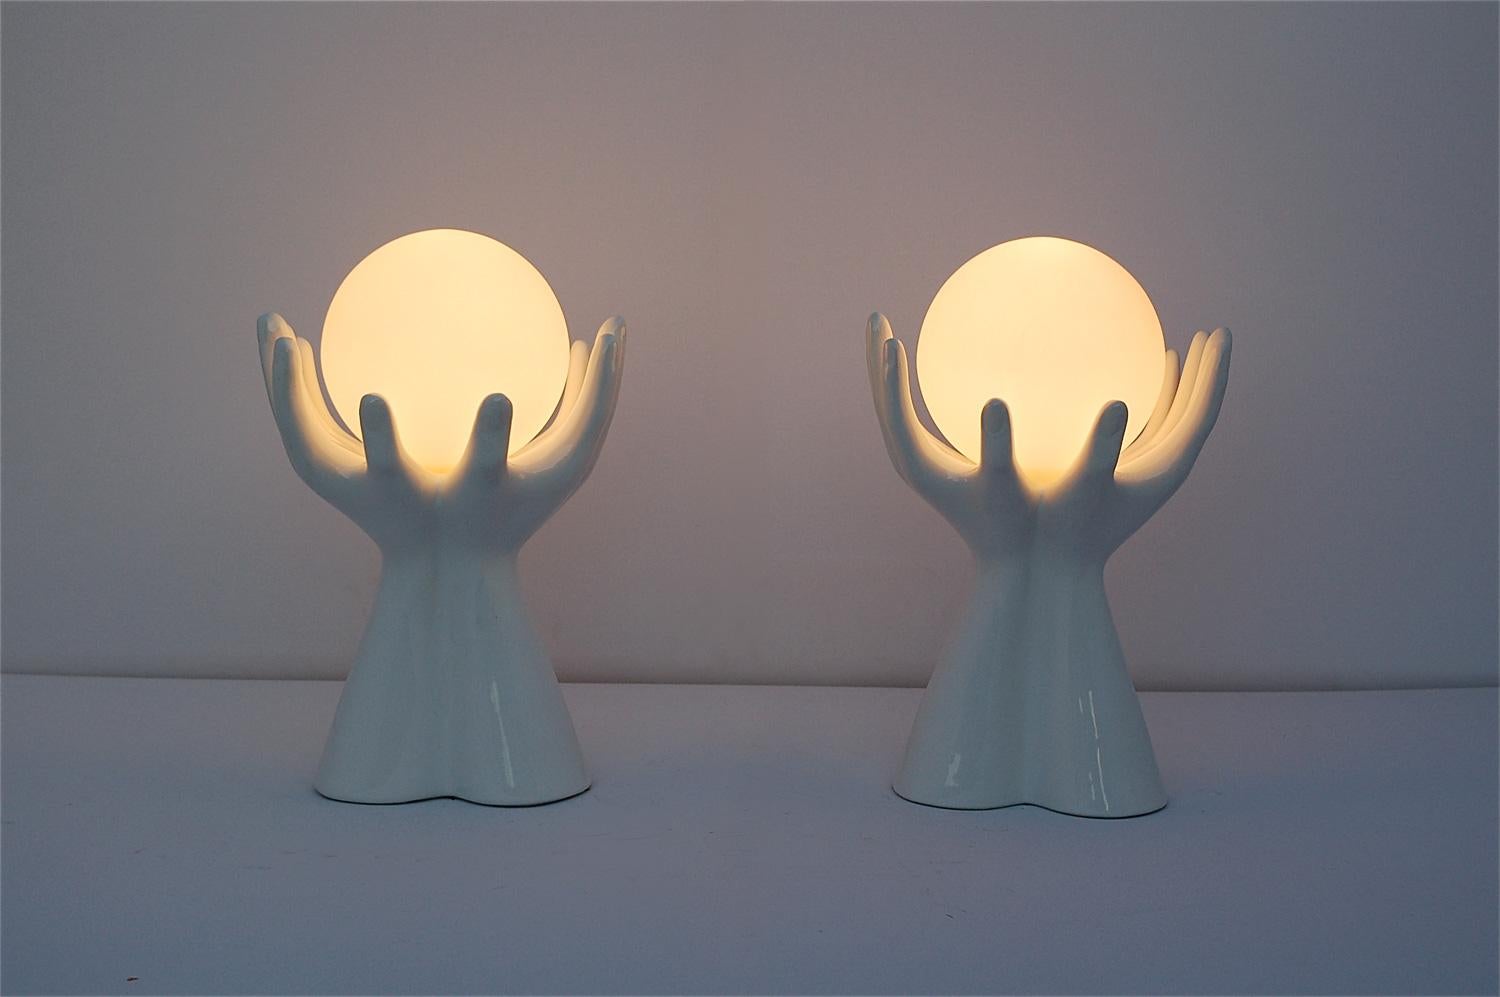 A matching pair of mid-20th century, 1960s white ceramic table lamps in the shape of a pair of hands clasping, holding a matte, opaque glass globe shade. The globe is held in place with a metal clasp. As a pair, they make an eclectic alternative to